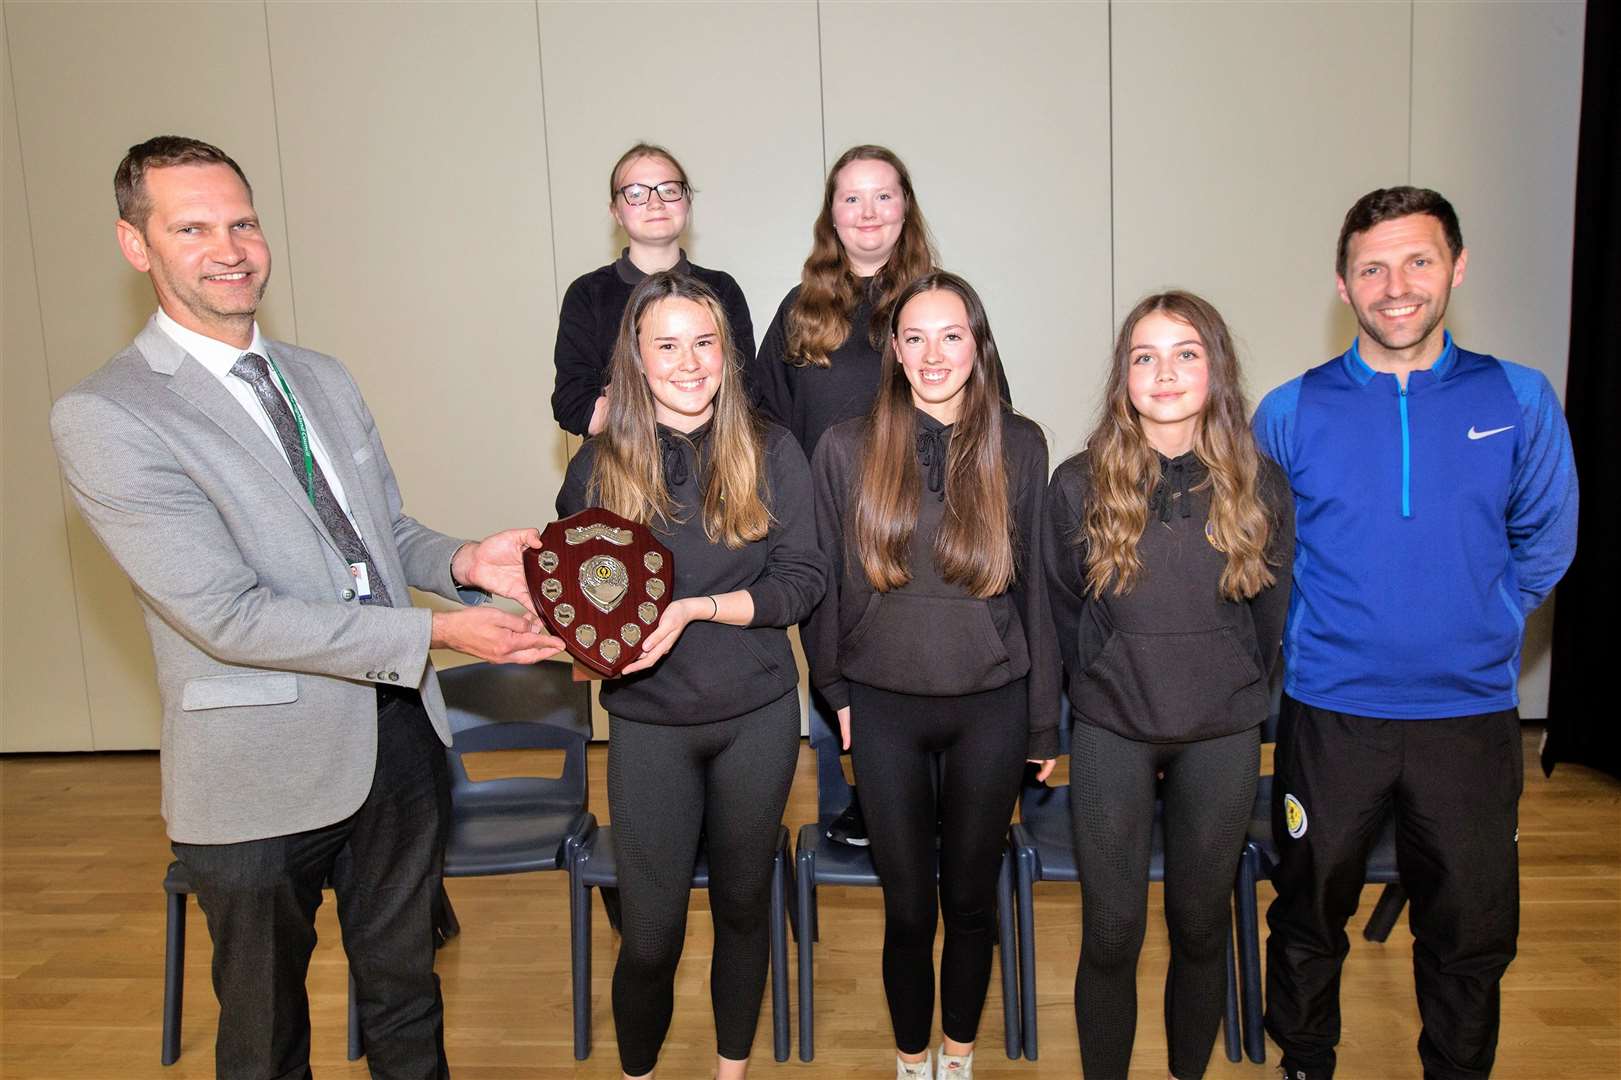 Wick High School's house sports trophy was won by Noss. Rector Sebastian Sandecki is seen here presenting the trophy to house representatives, from left, (front), Katie MacDonald, Lucy Harper, Abby Swanson, (back), Blyth Bullen and Erin Moore. Looking on is Alan Davis, head of faculty. Photo: Robert MacDonald/Northern Studios